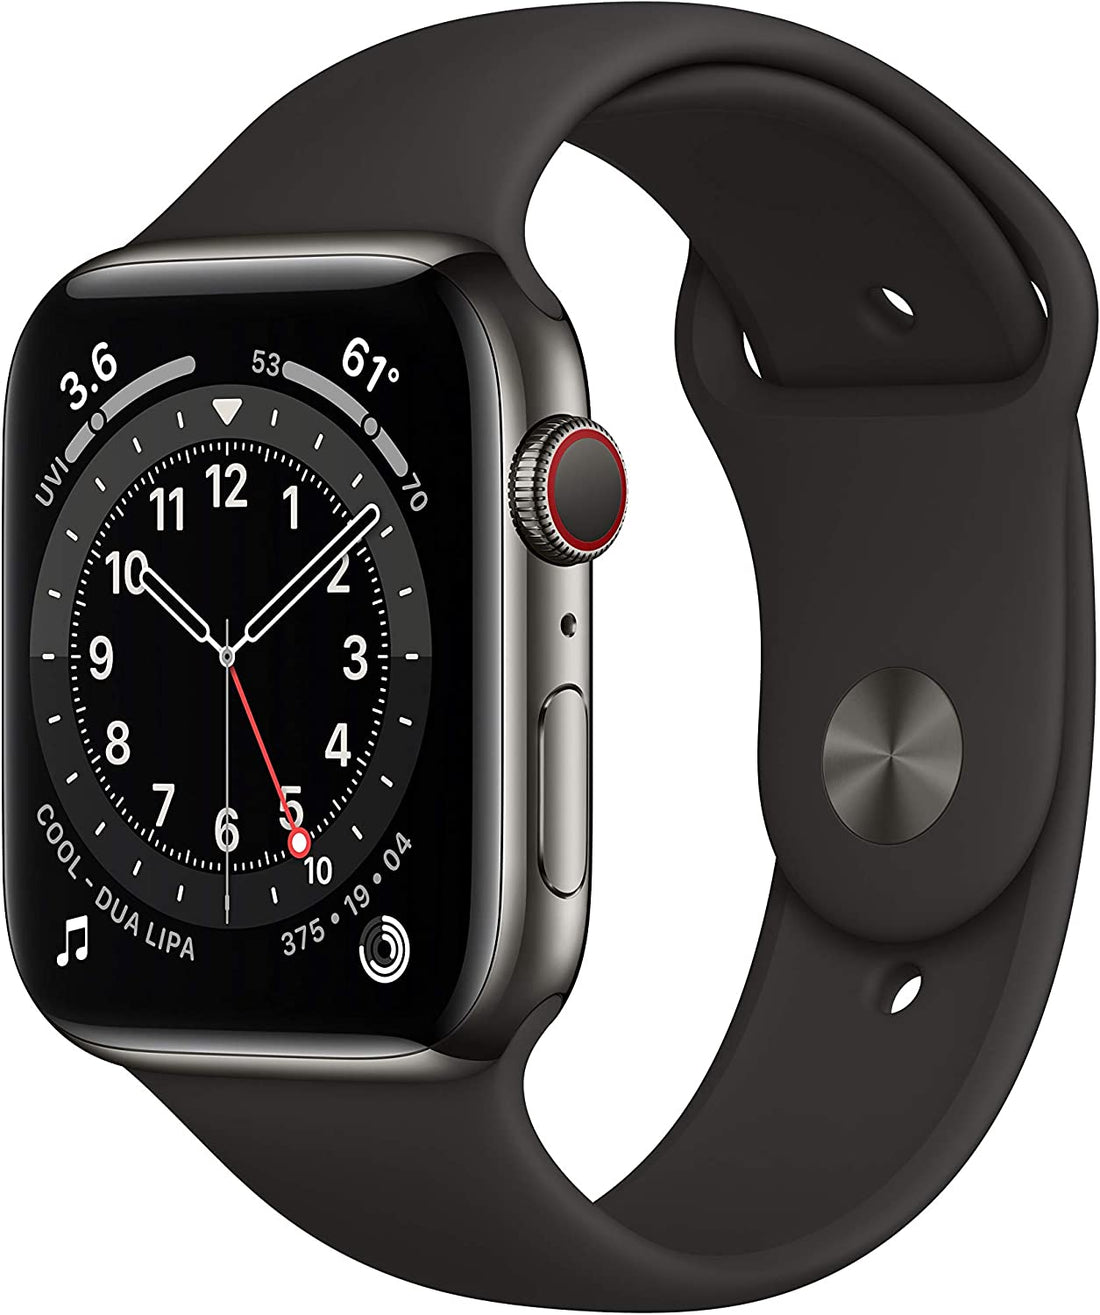 Apple Watch Series 6 (GPS + LTE) 44mm Graphite Stainless Steel Case &amp; Black Sport Band (Refurbished)